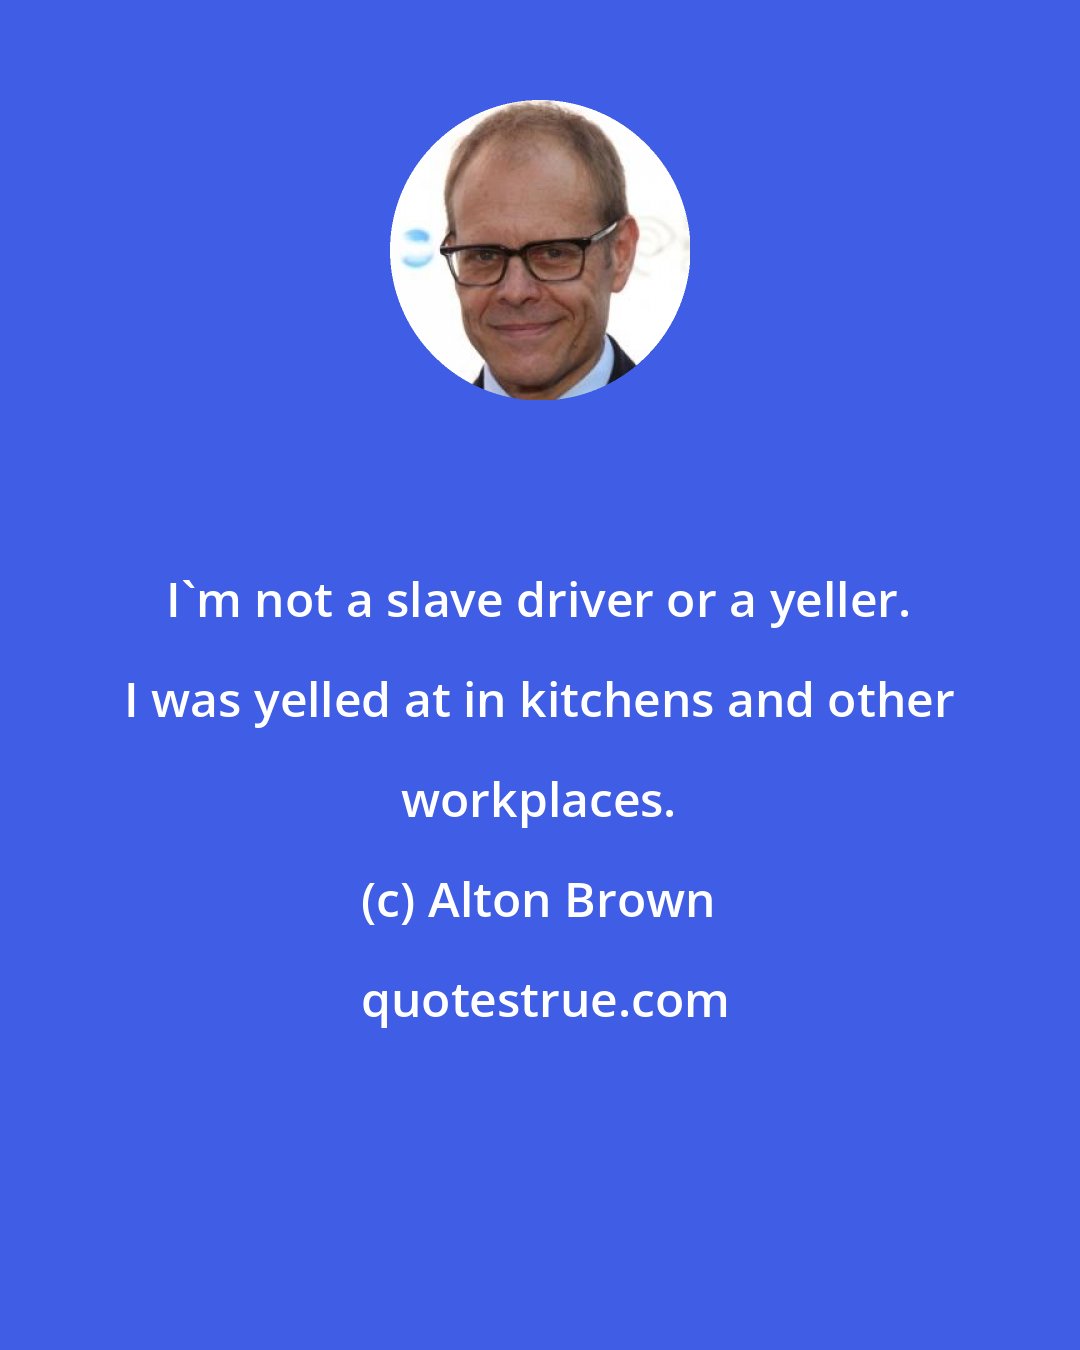 Alton Brown: I'm not a slave driver or a yeller. I was yelled at in kitchens and other workplaces.